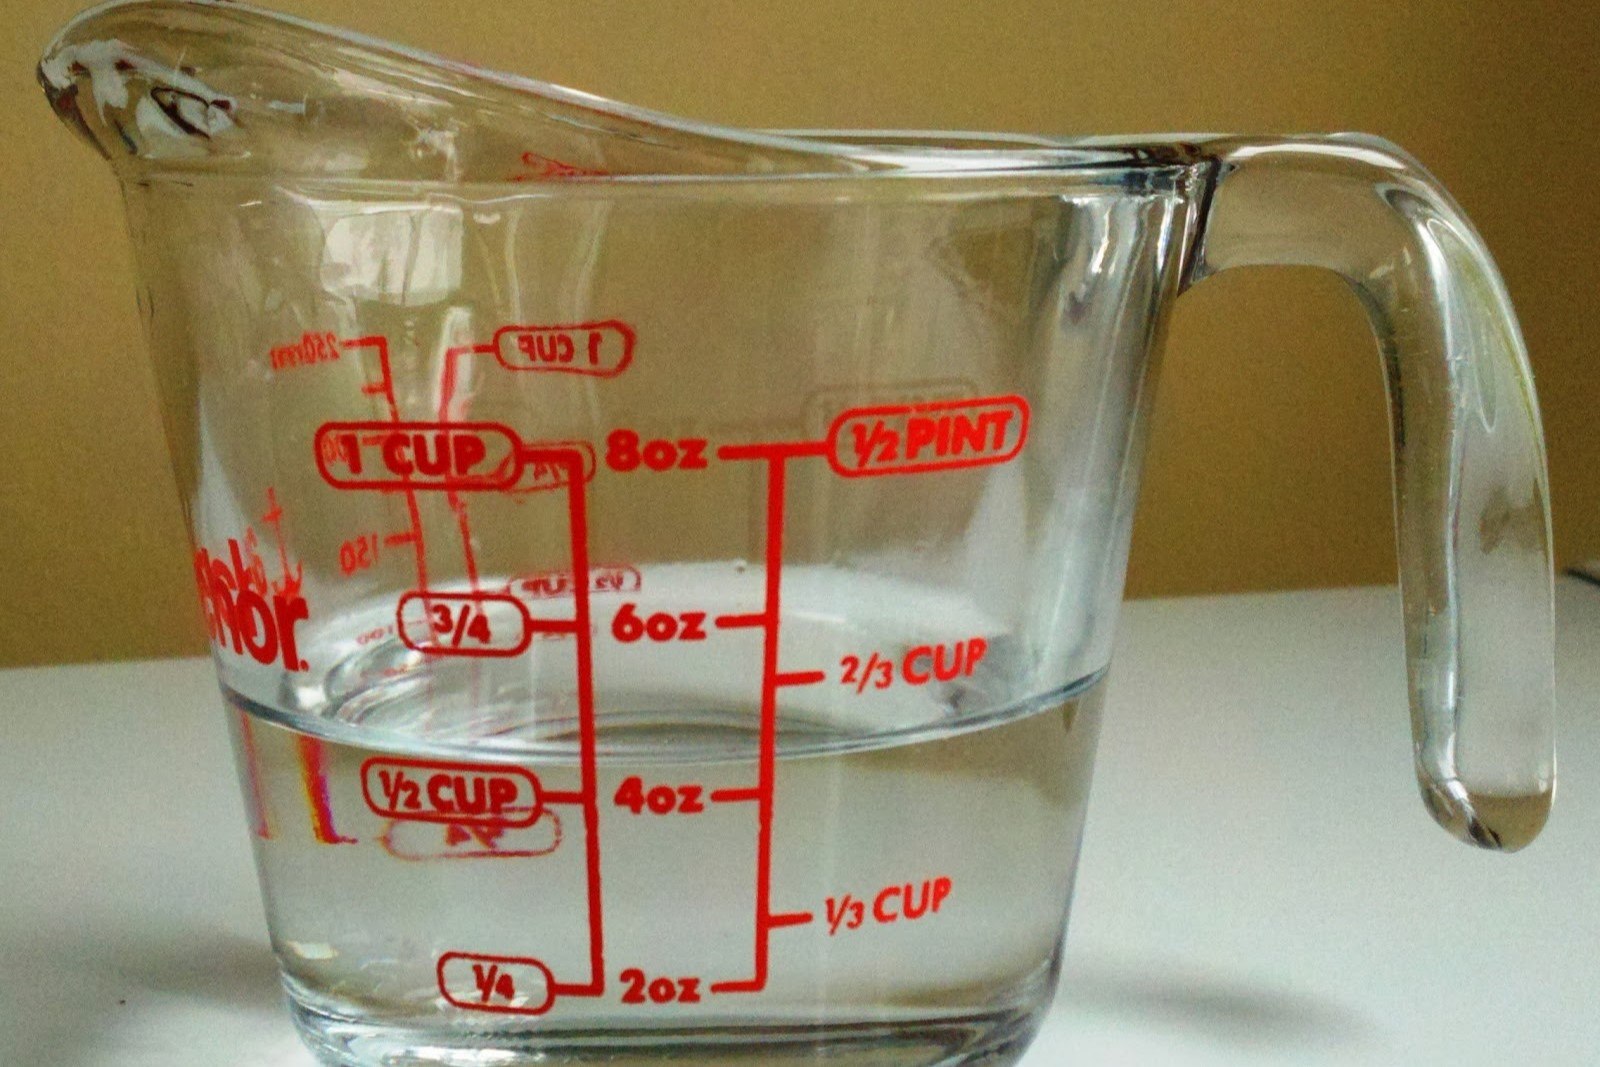 This Simple Math Trick Will Blow Your Mind! Find Out The Double Of 2/3 Of A Cup!